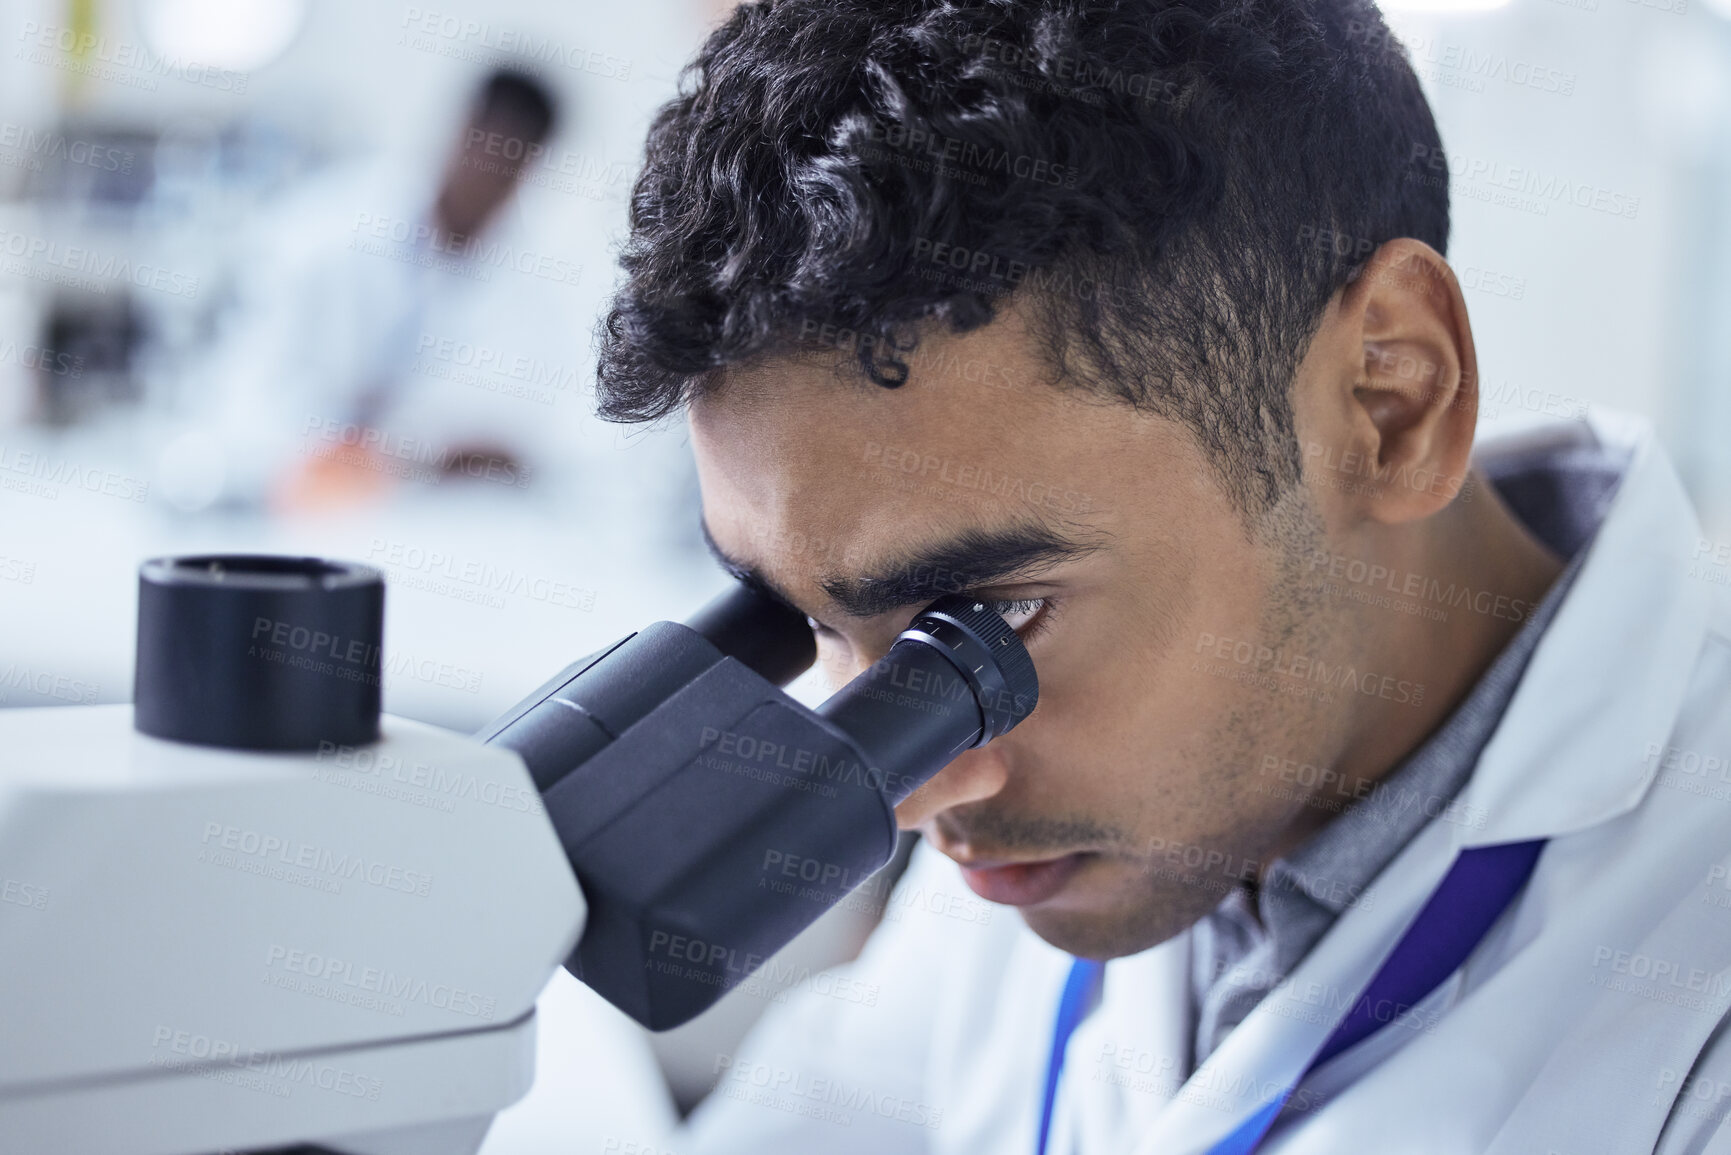 Buy stock photo Shot of a young male lab technician using a microscope